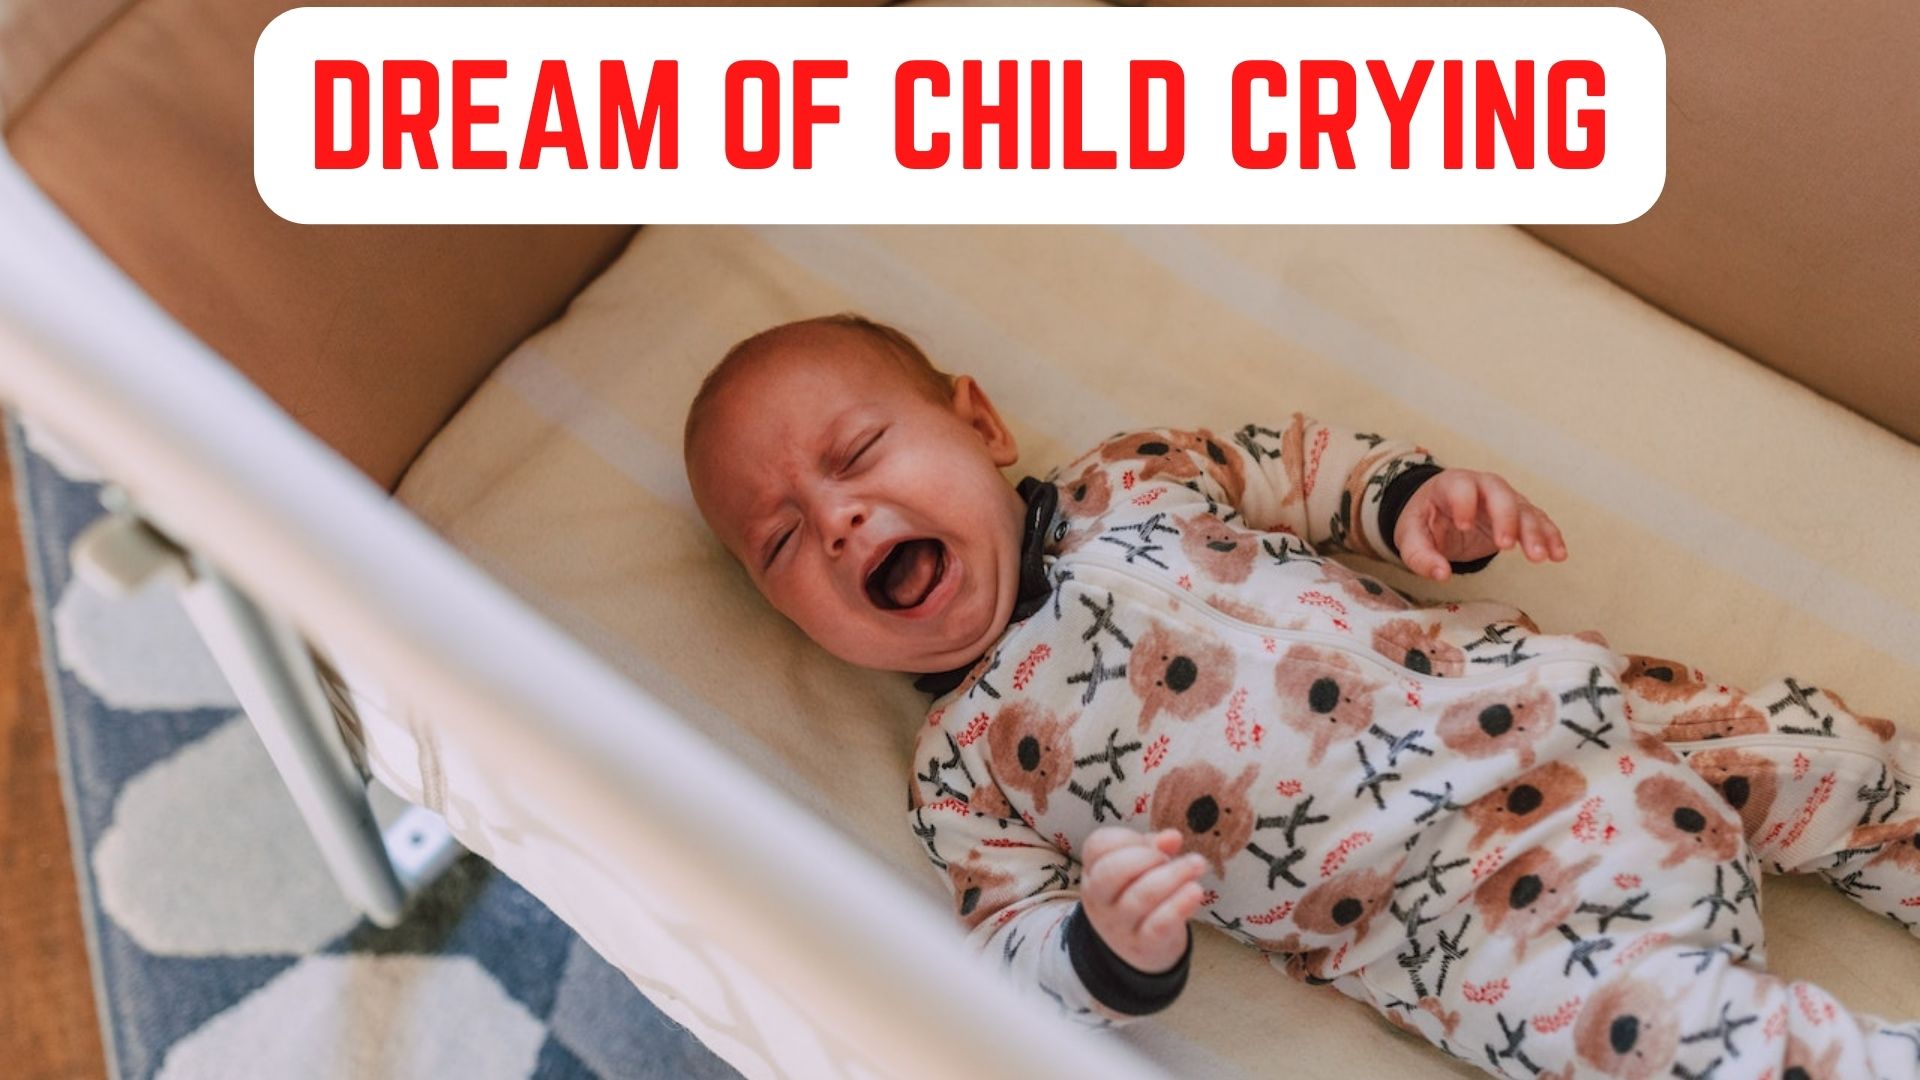 Dream Of Child Crying - A Sign Of Illness